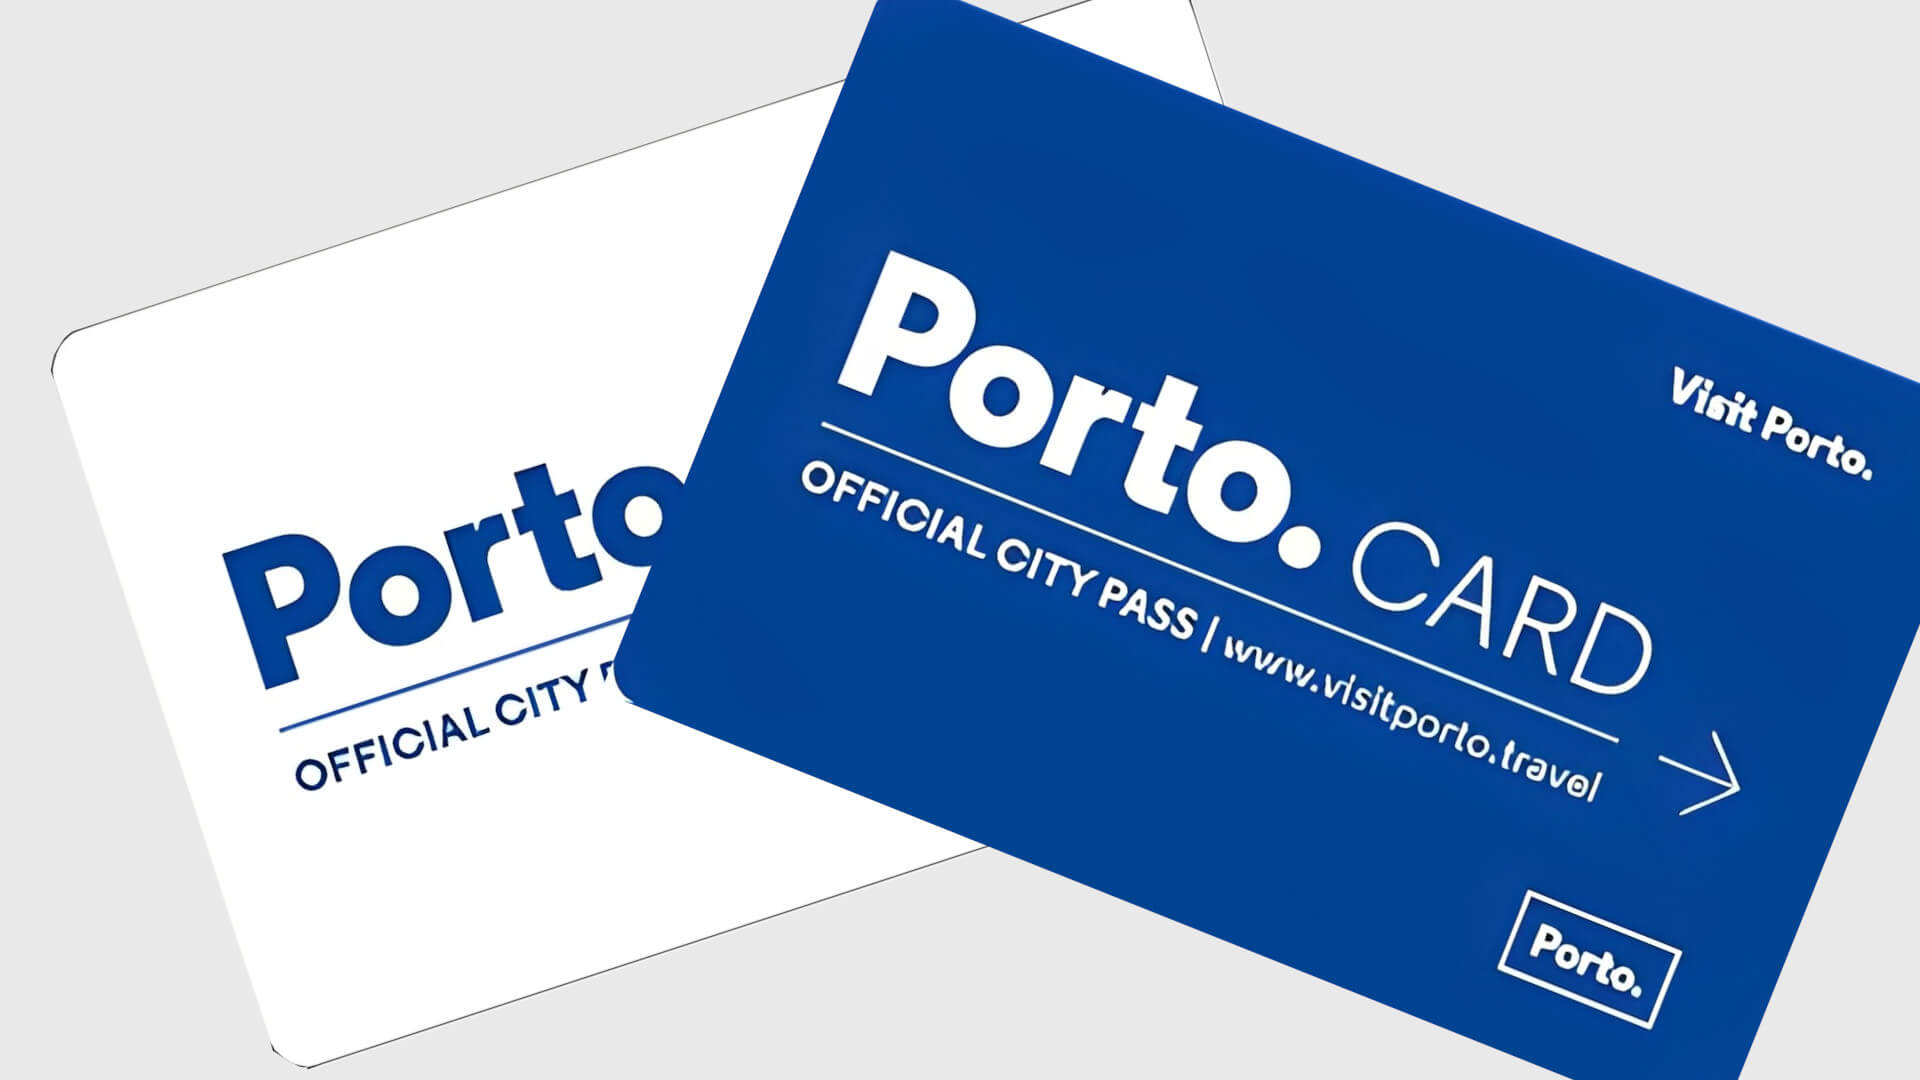 How to use the Porto Card